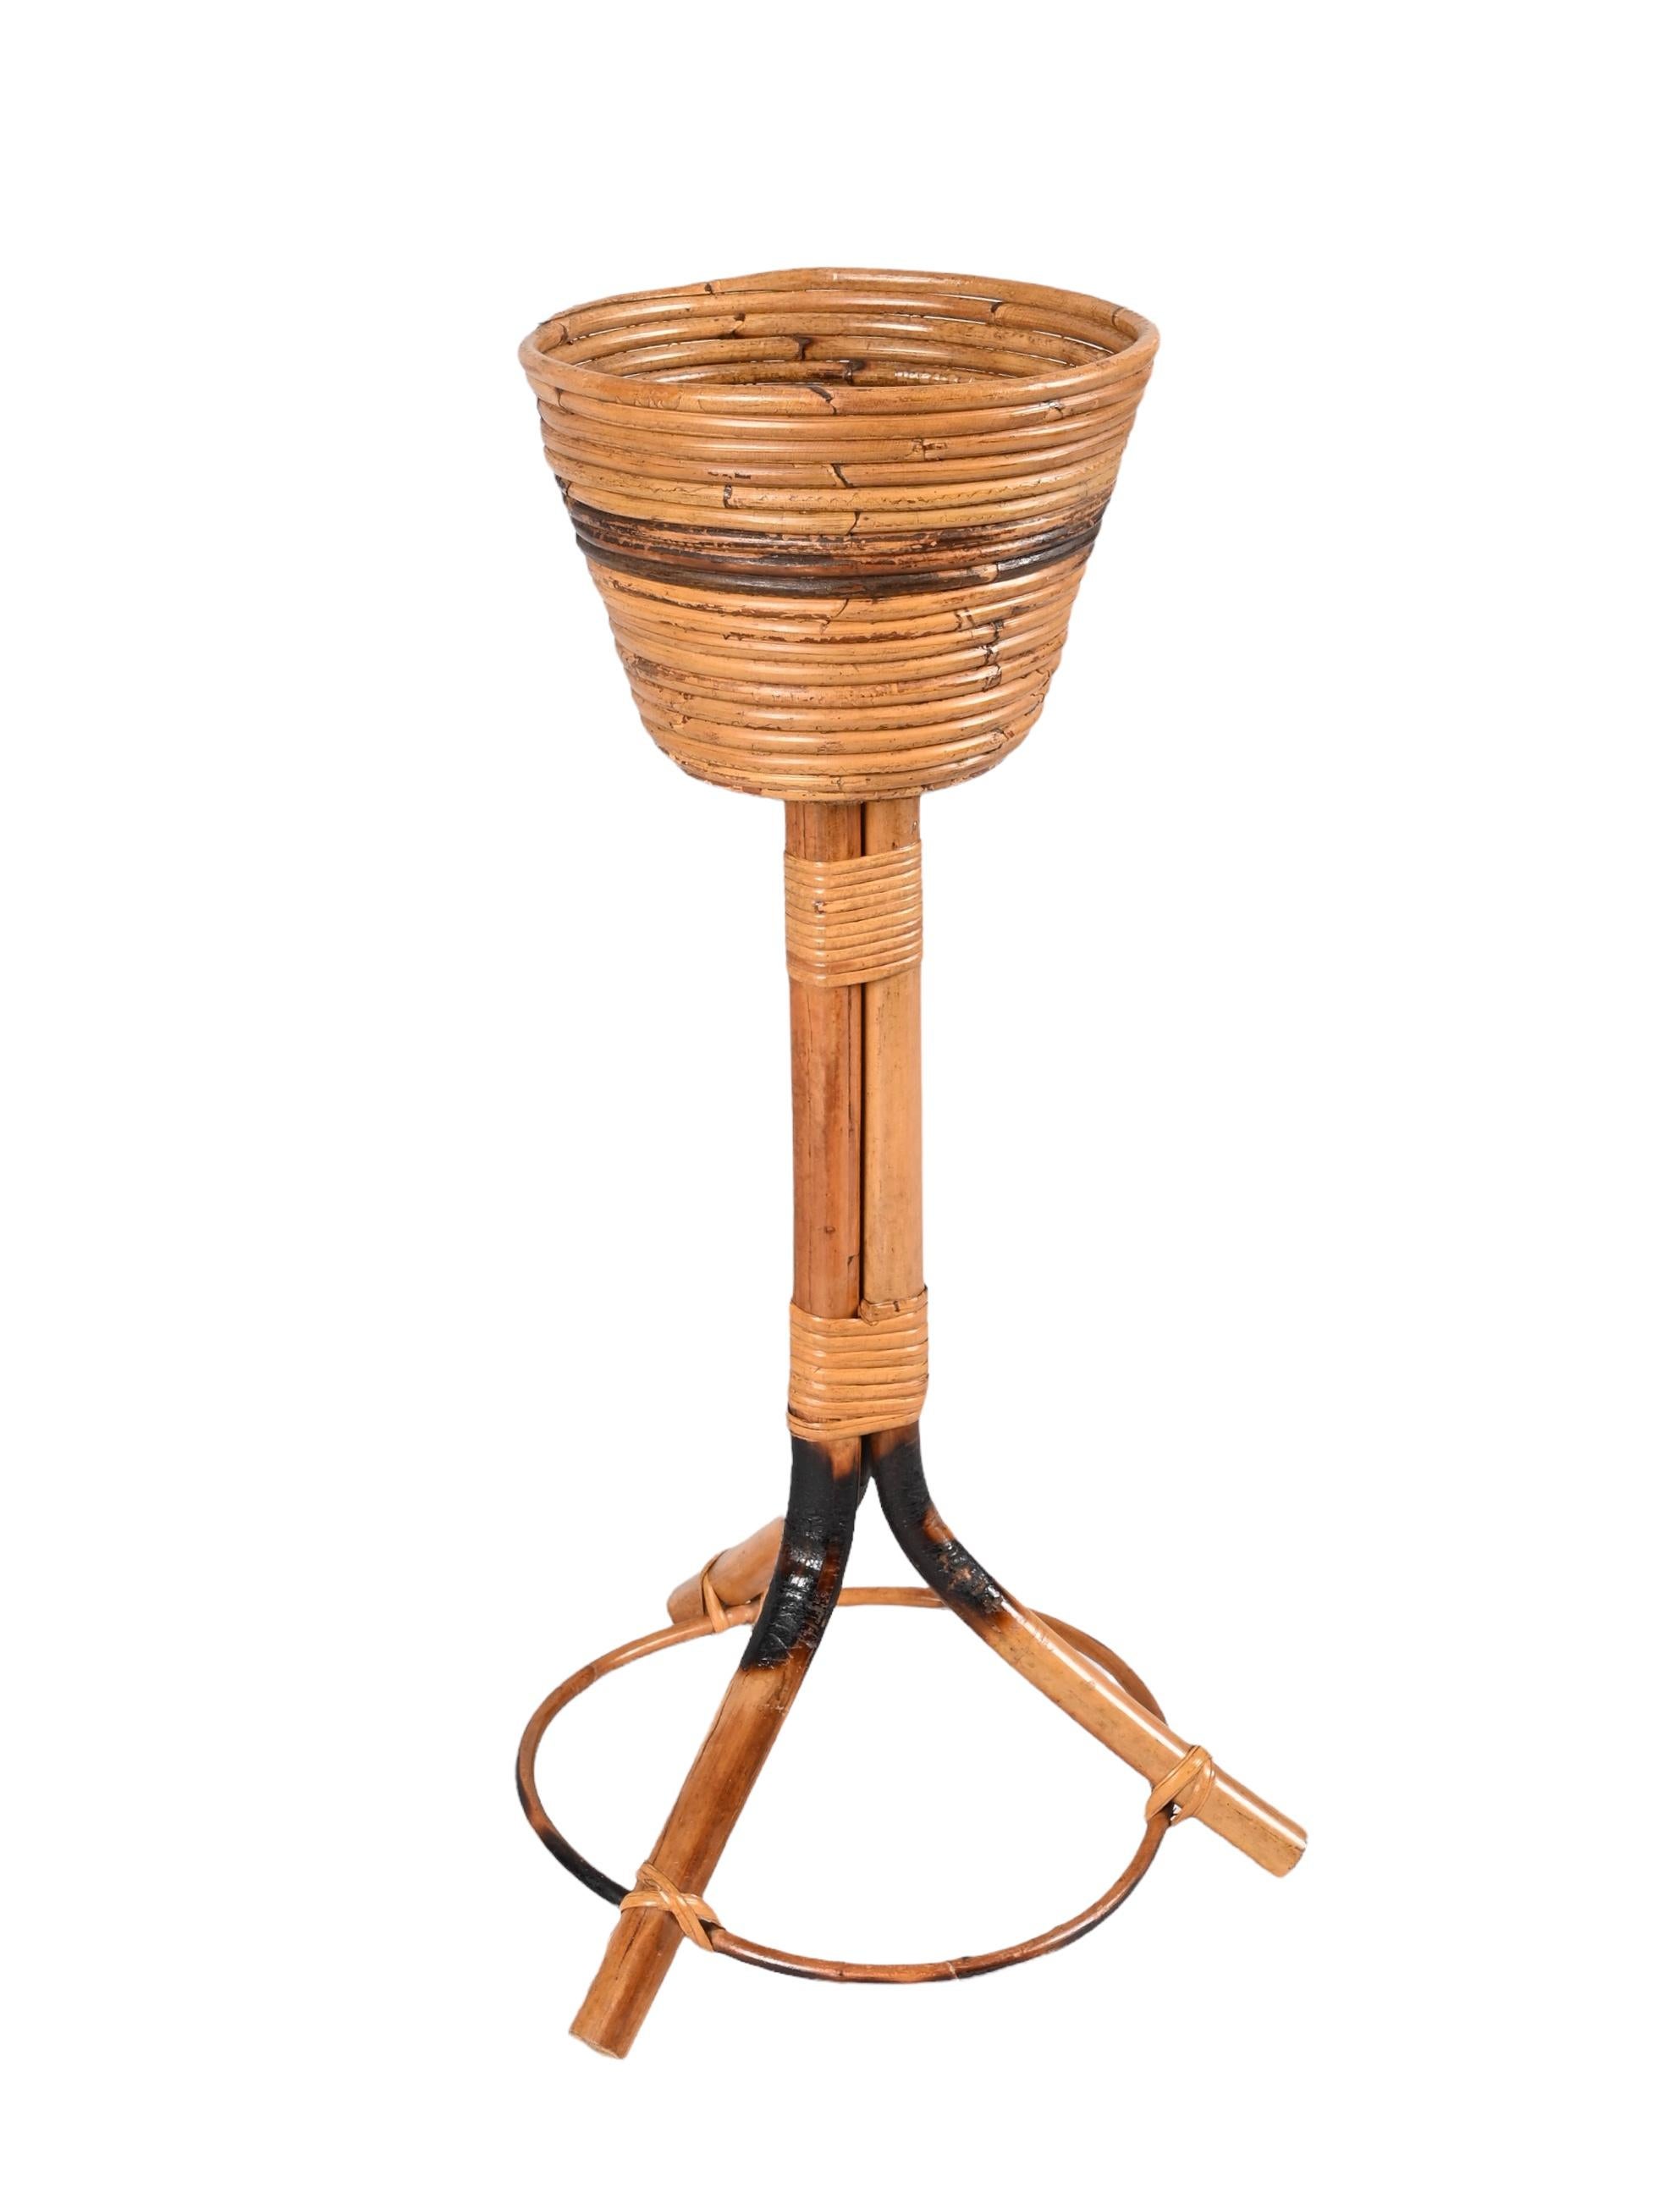 Midcentury Italian Bamboo Cane and Rattan Round Plant Holder, 1950s For Sale 5